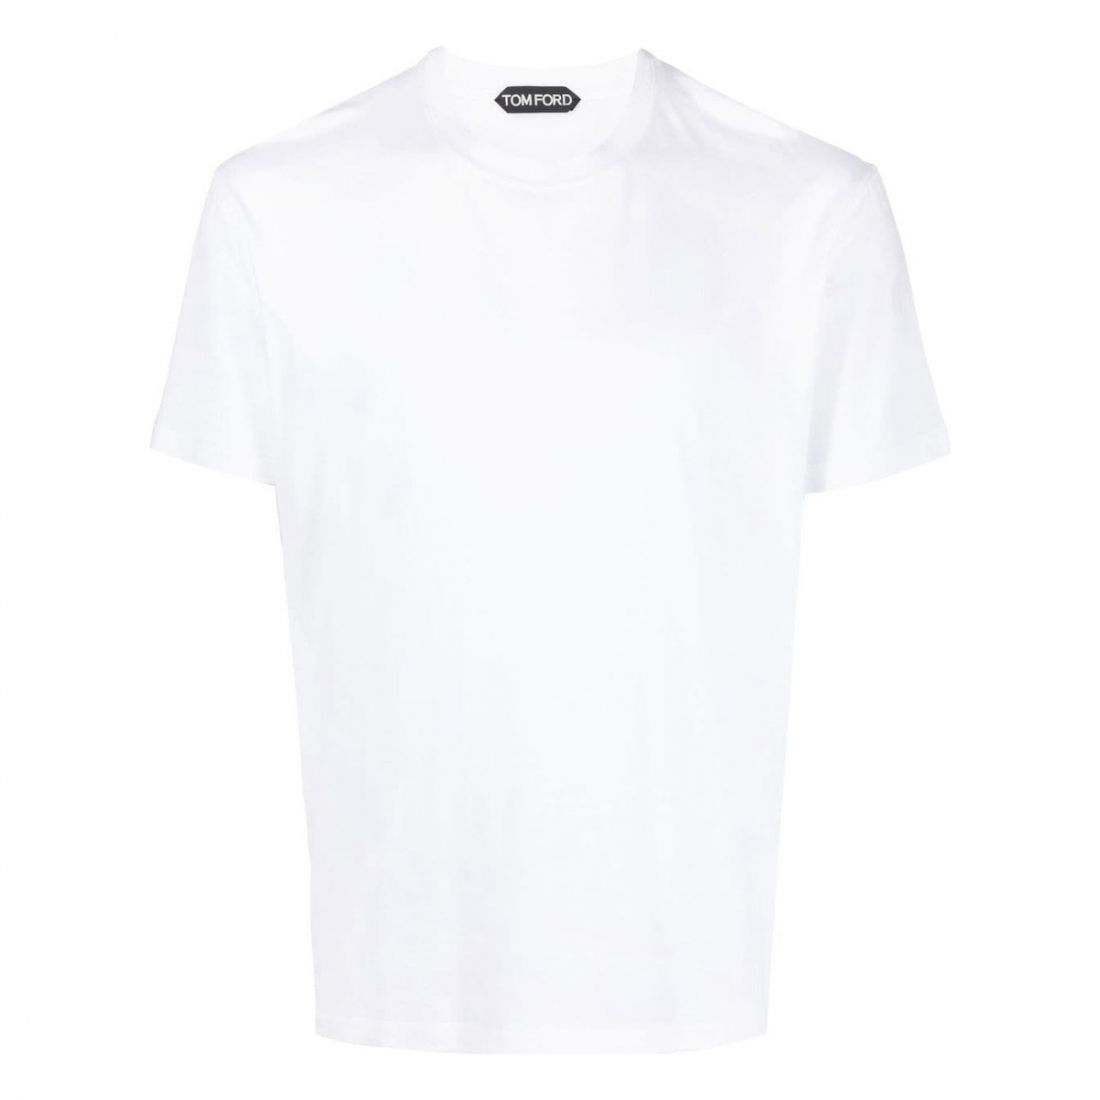 Tom Ford - T-shirt pour Hommes